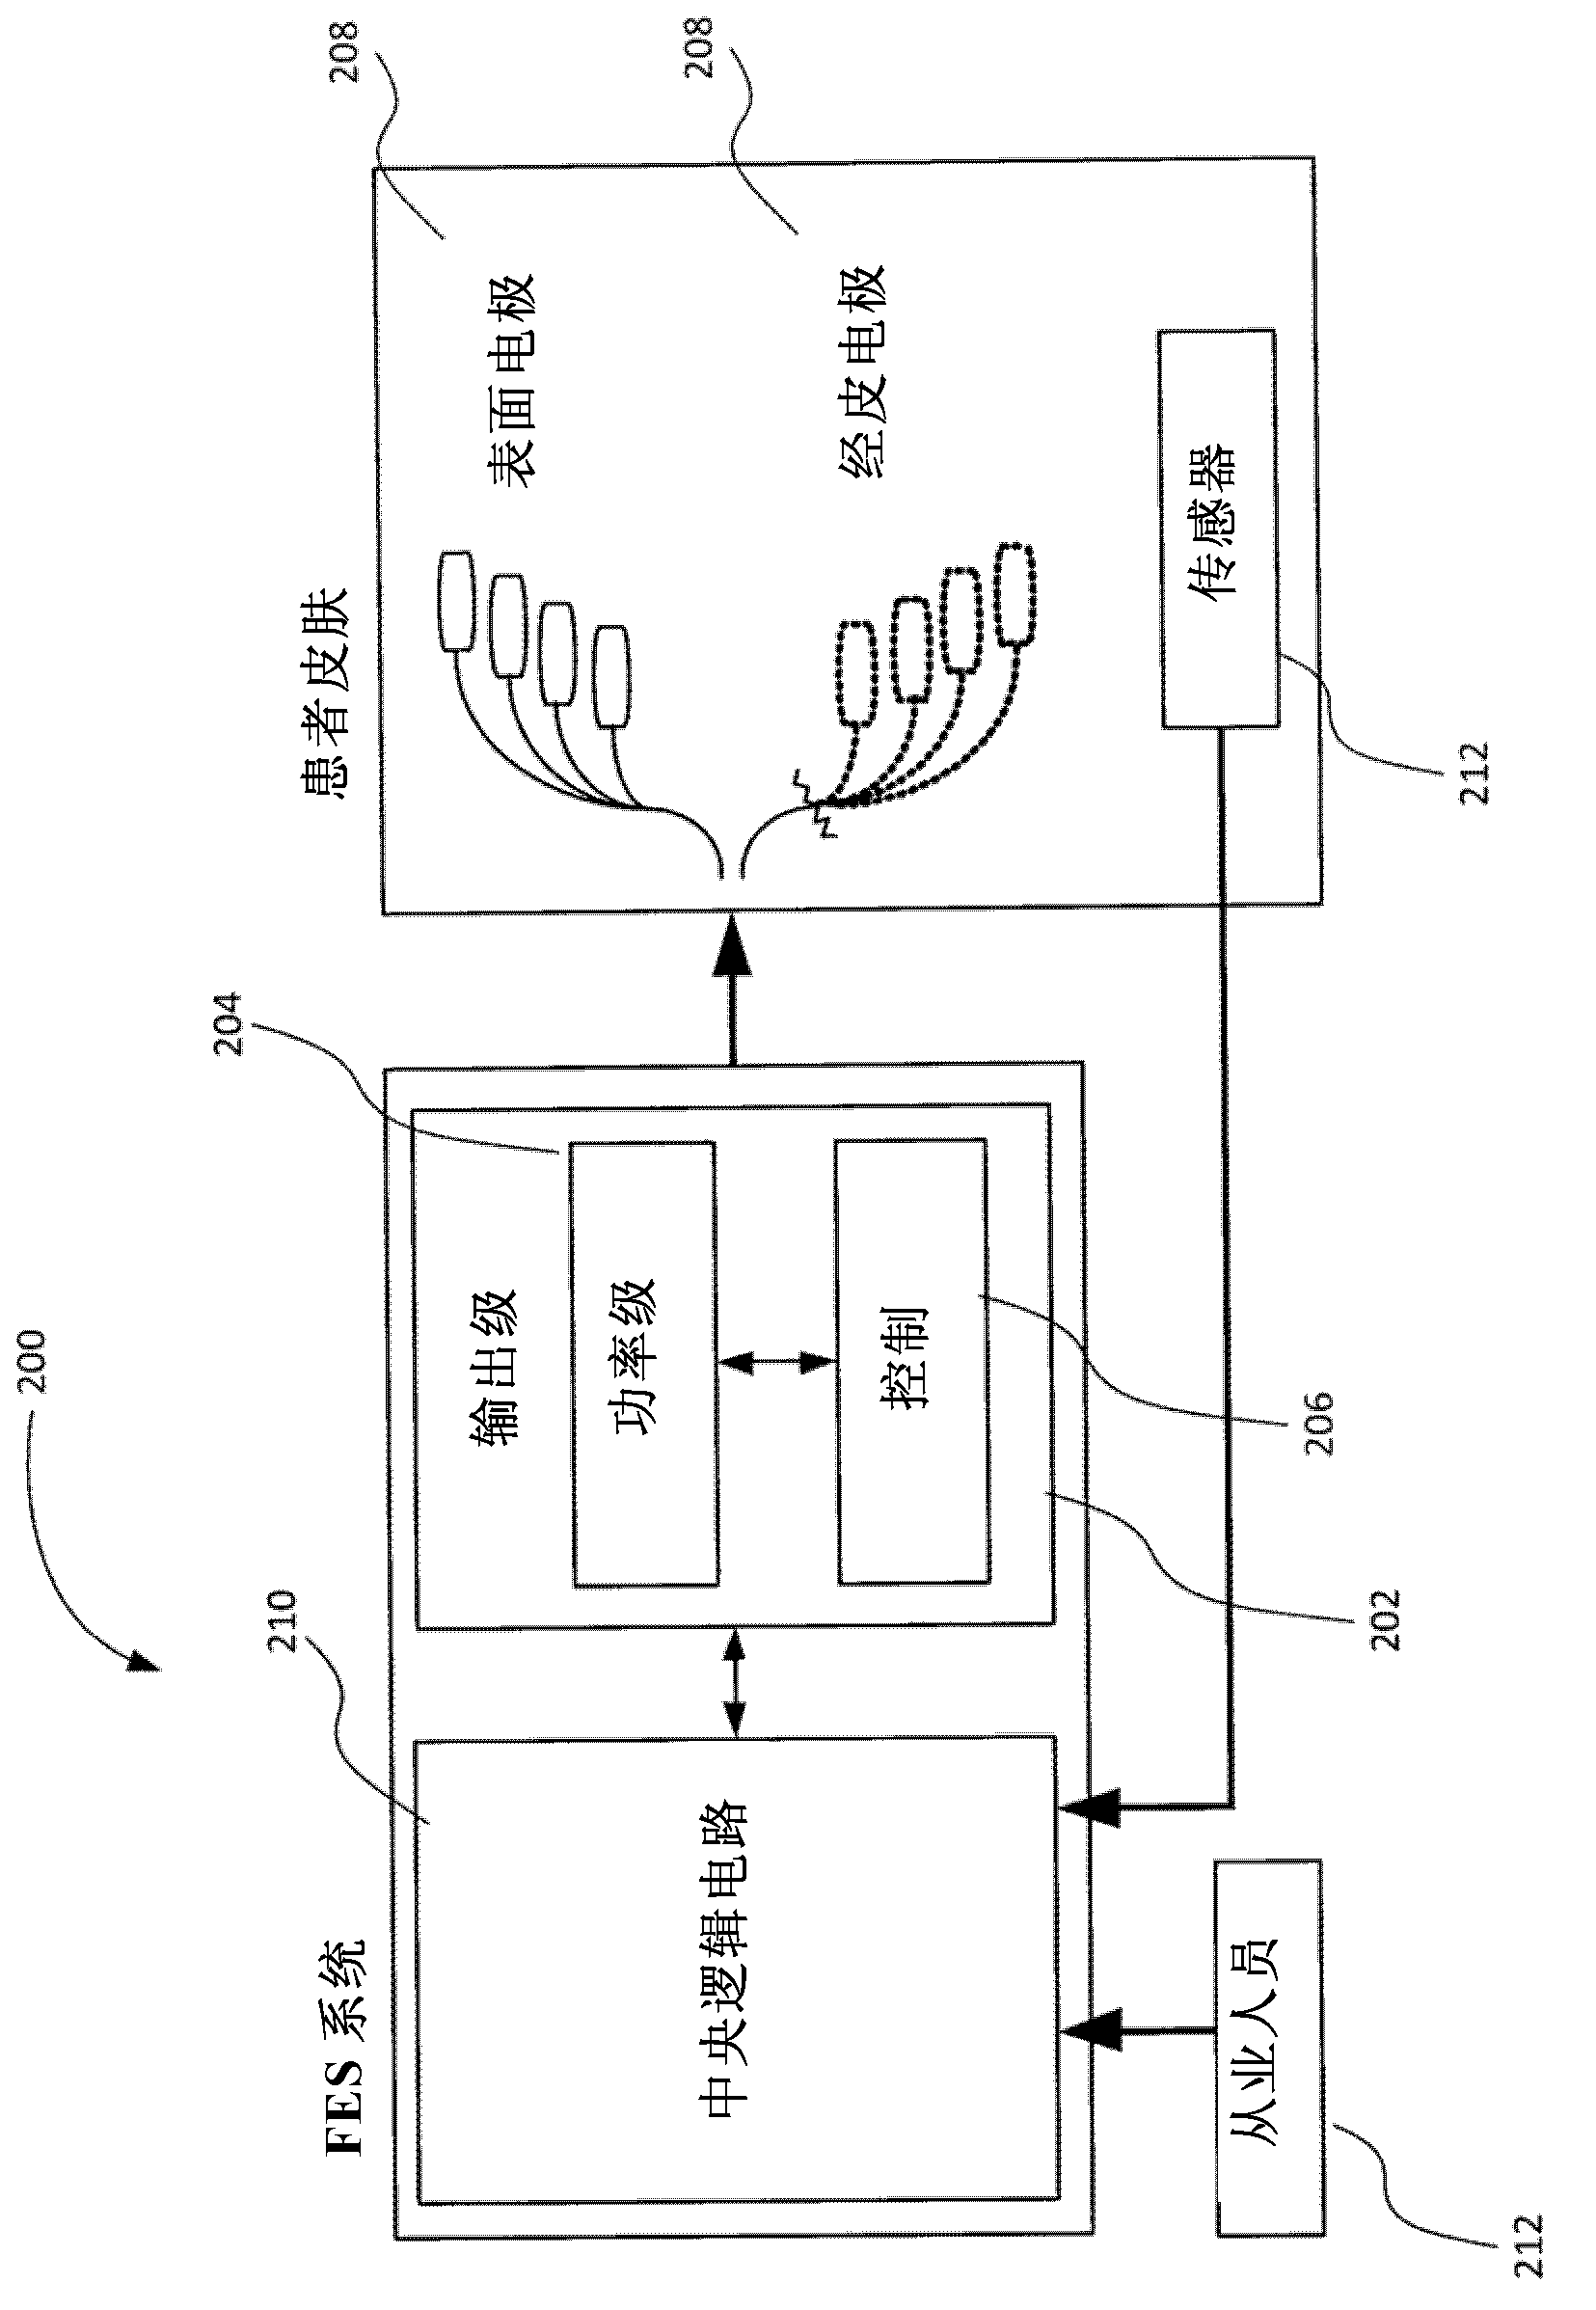 Functional electrical stimulation device and system, and use thereof